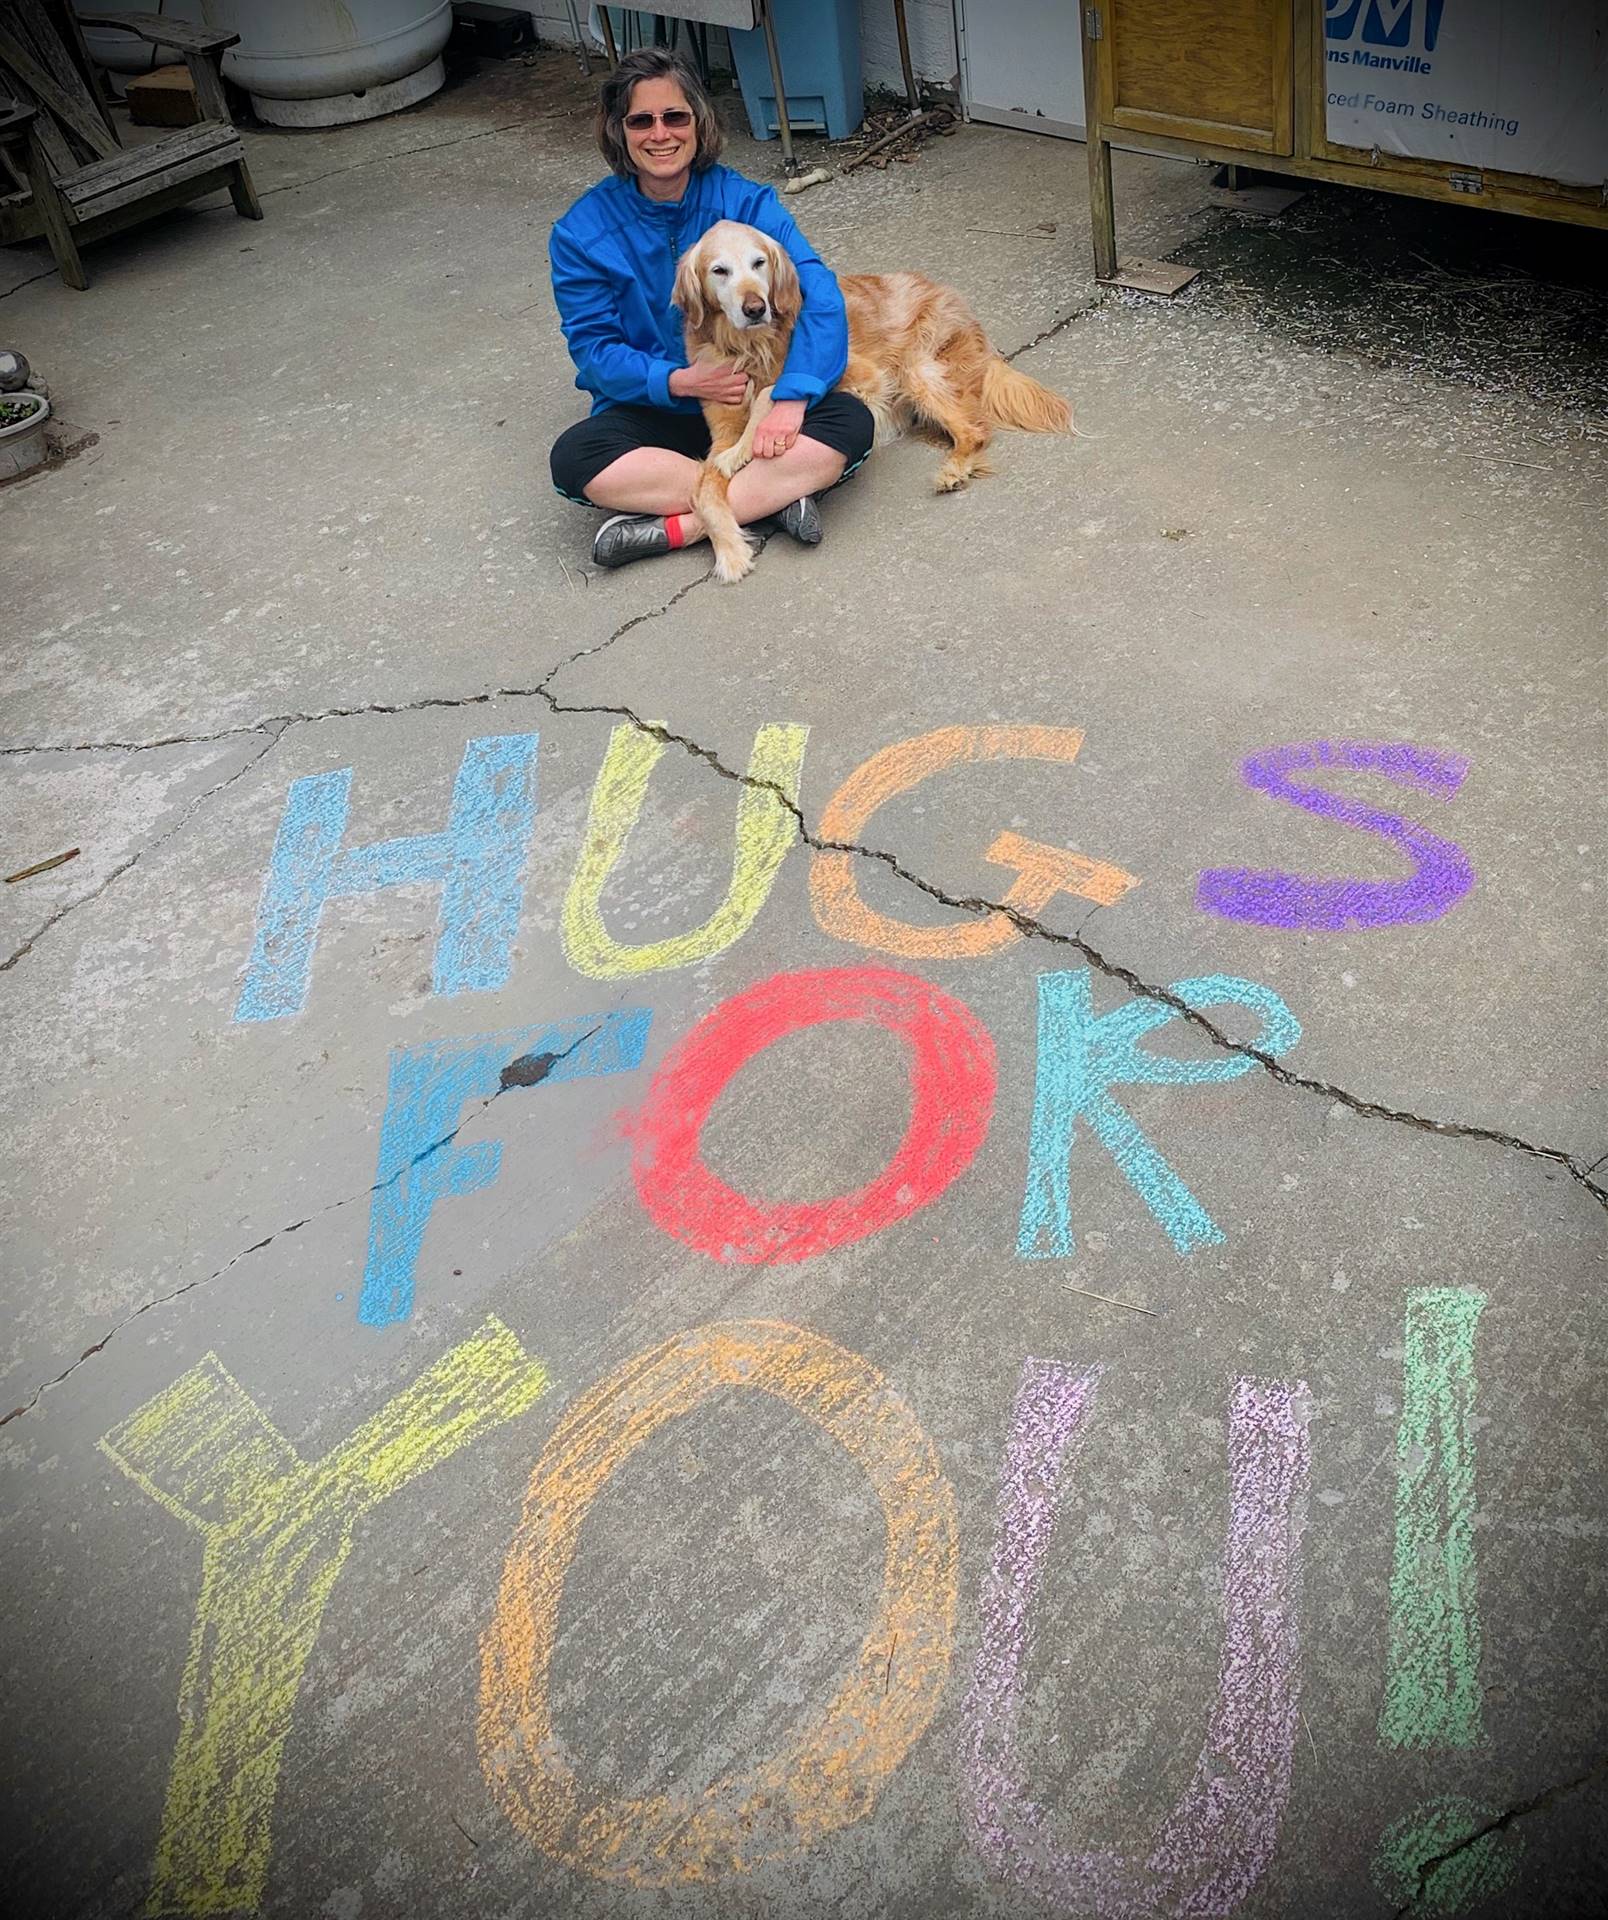 staff member and dog with "HUGS FOR YOU" sign